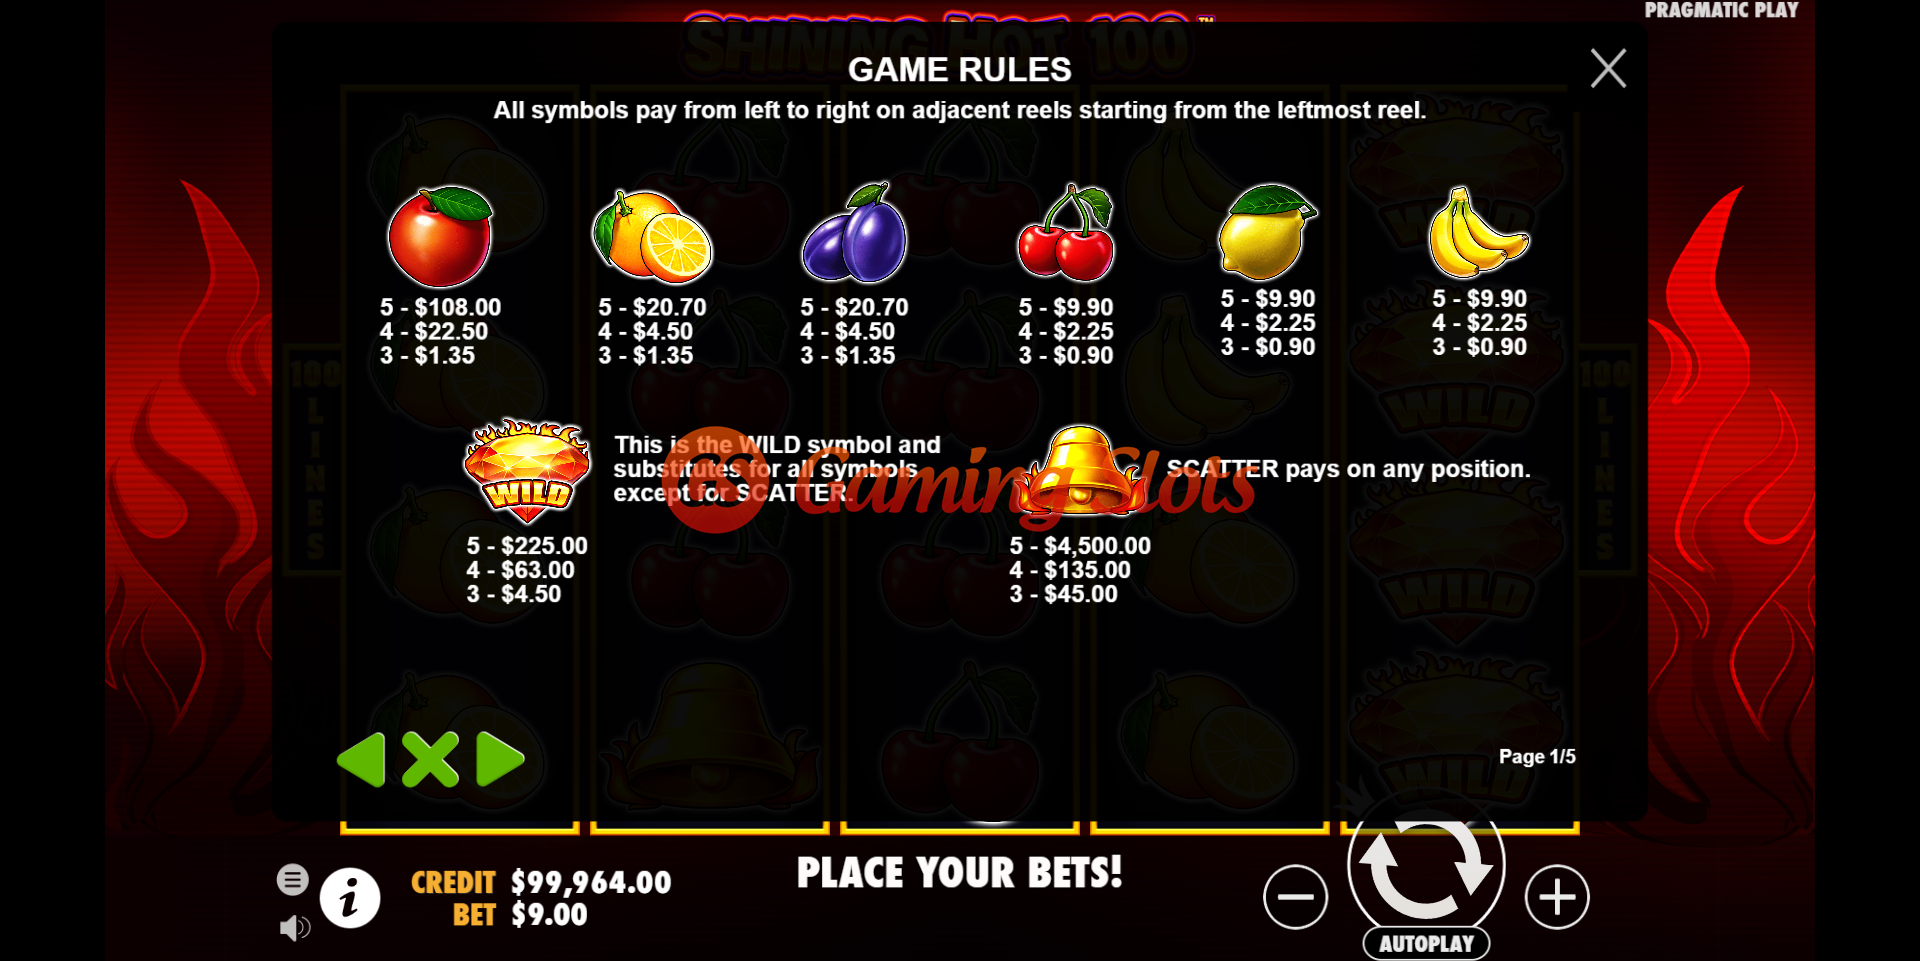 Game Rules for Shining Hot 100 slot from Pragmatic Play